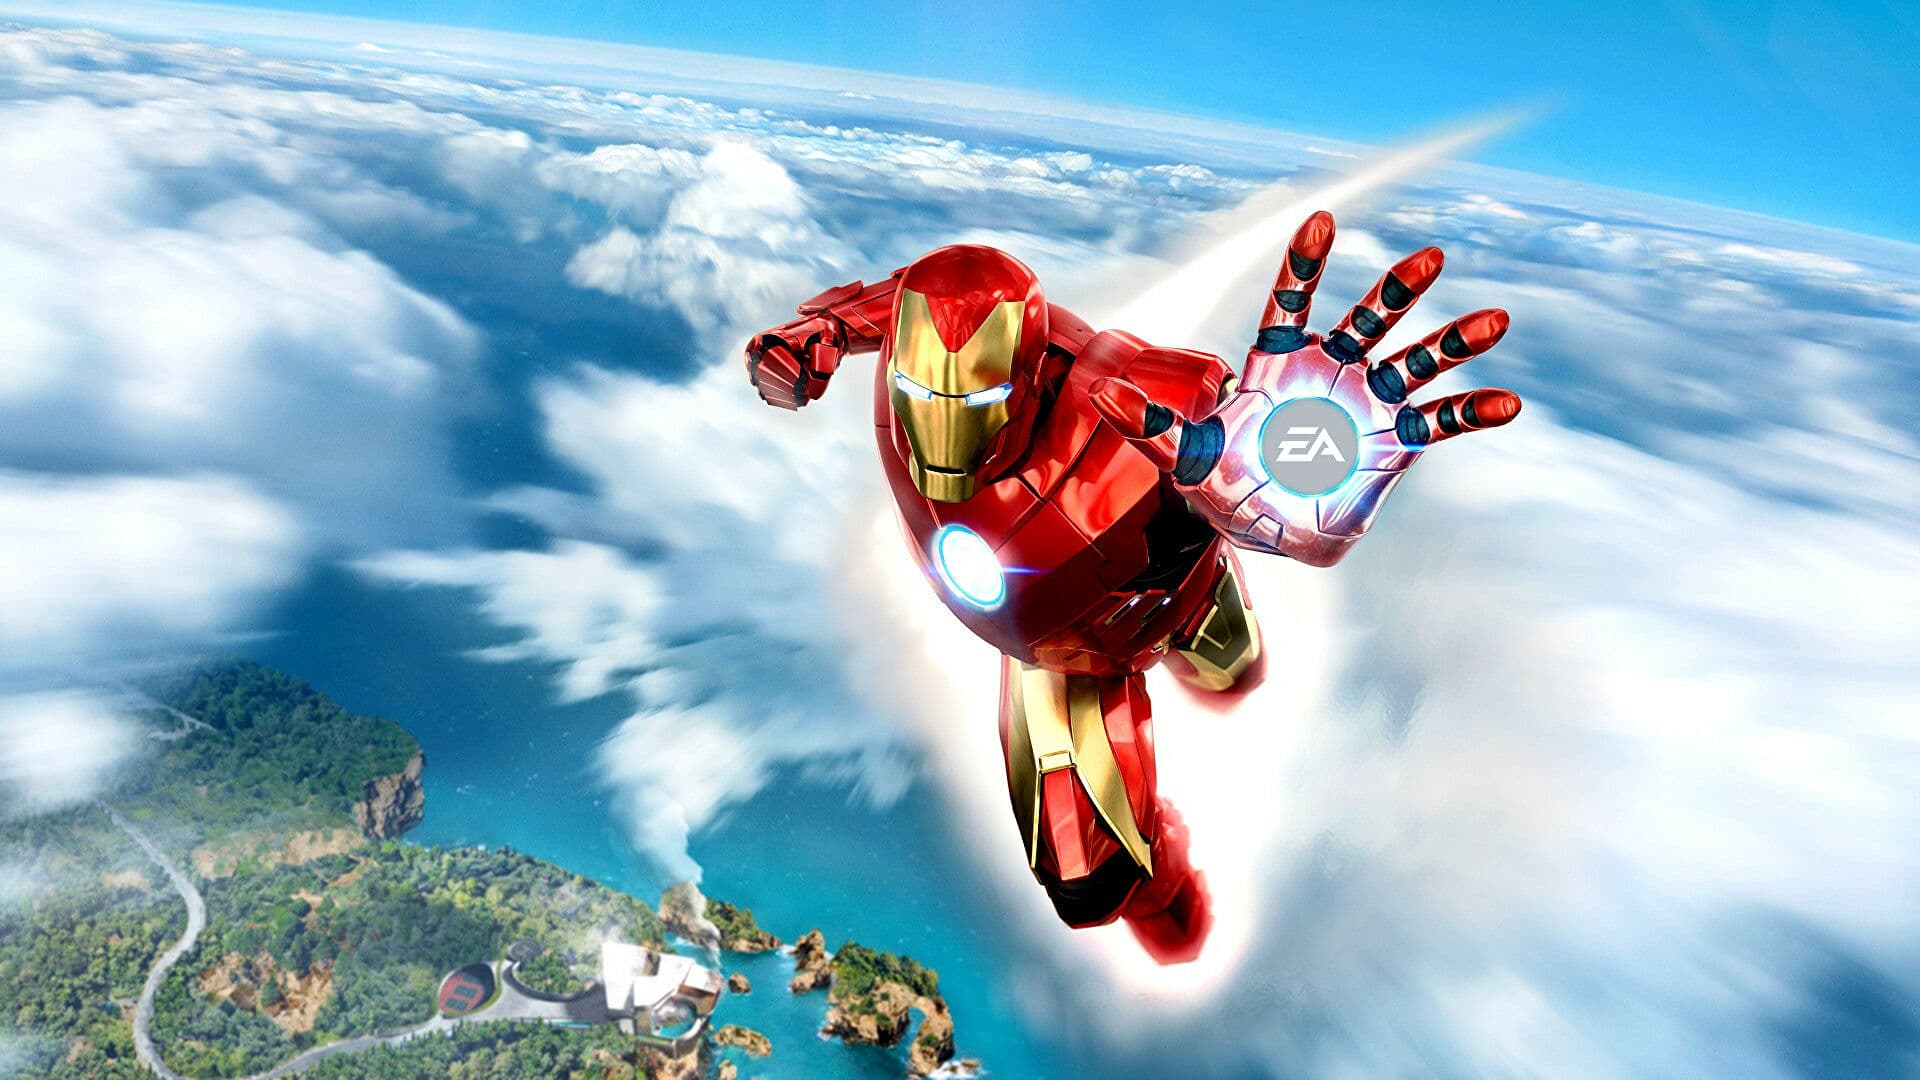 Iron Man: EA is reportedly working on a new game starring Tony Stark